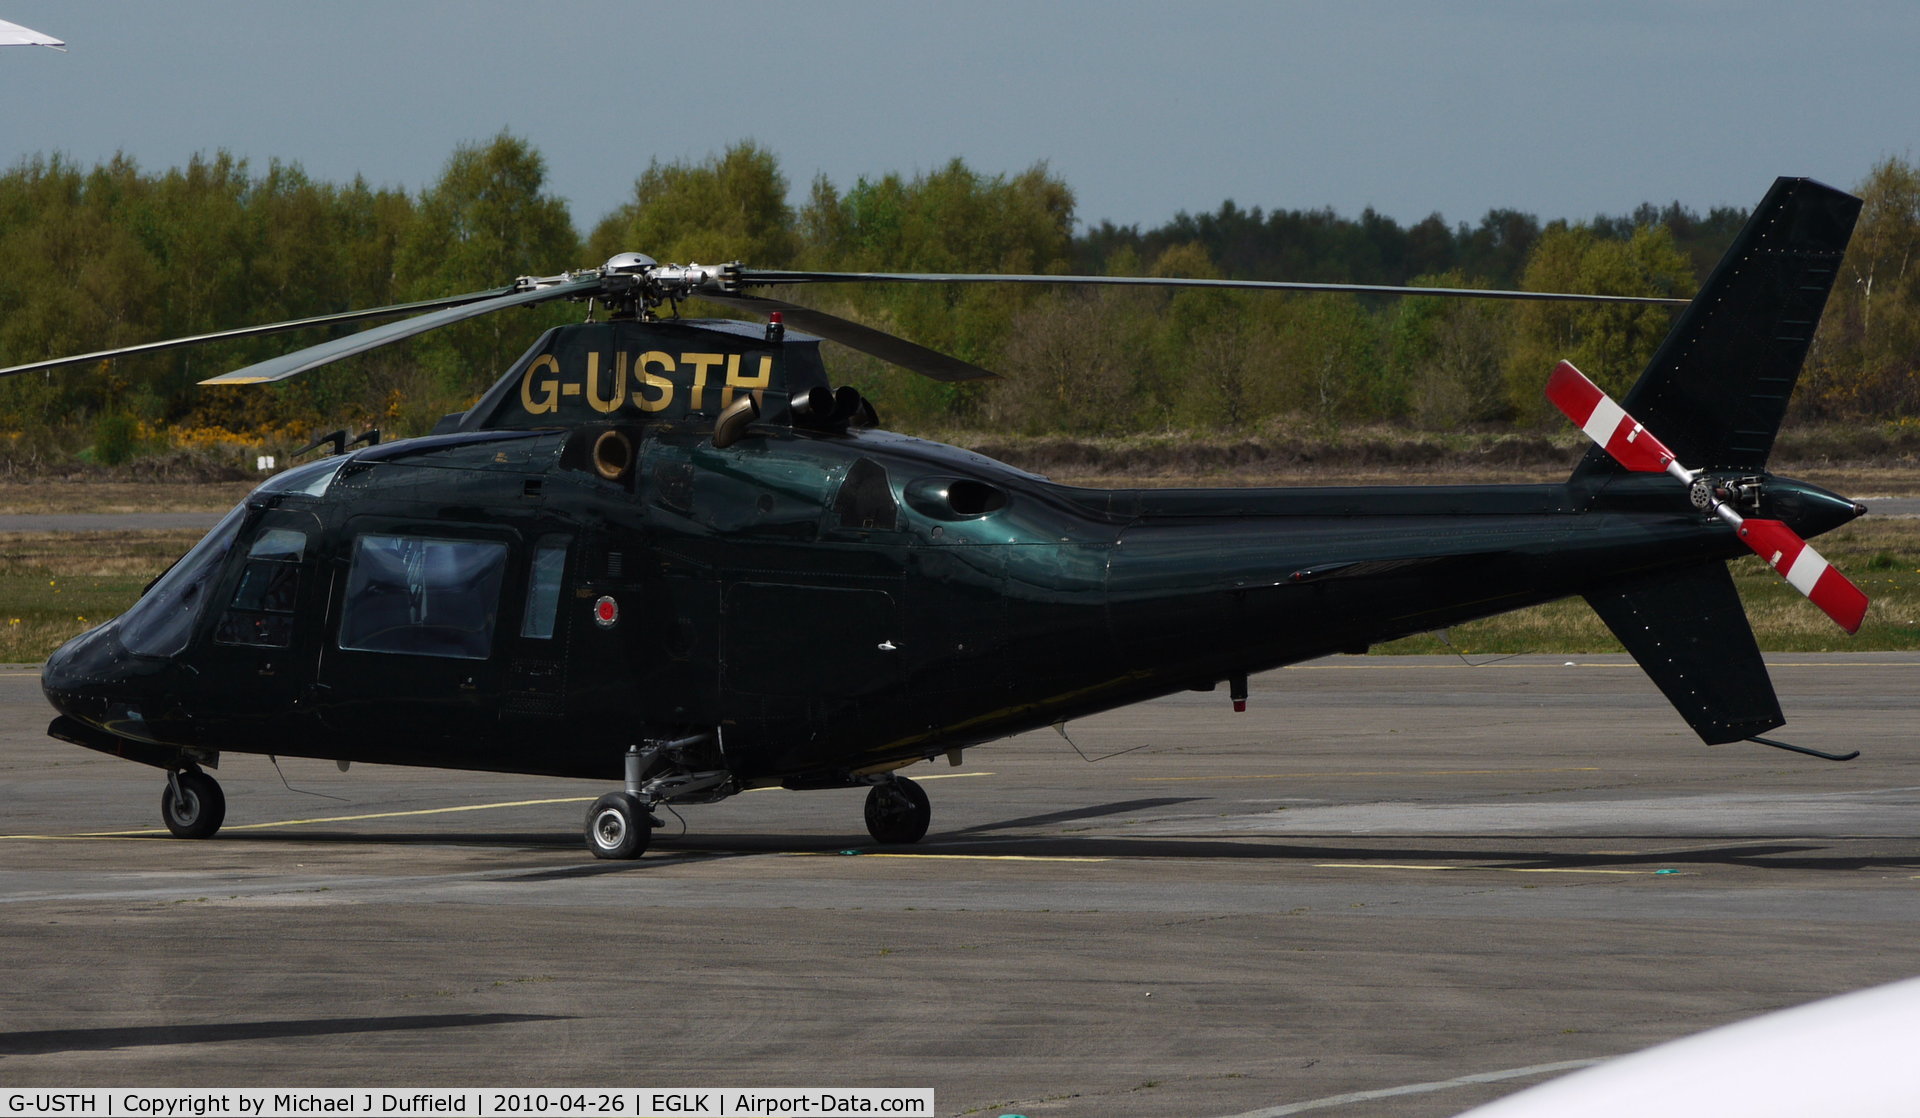 G-USTH, 1983 Agusta A-109A-2 C/N 7304, Agusta A109 executive helicopter visiting Blackbushe on 26th April 2010.